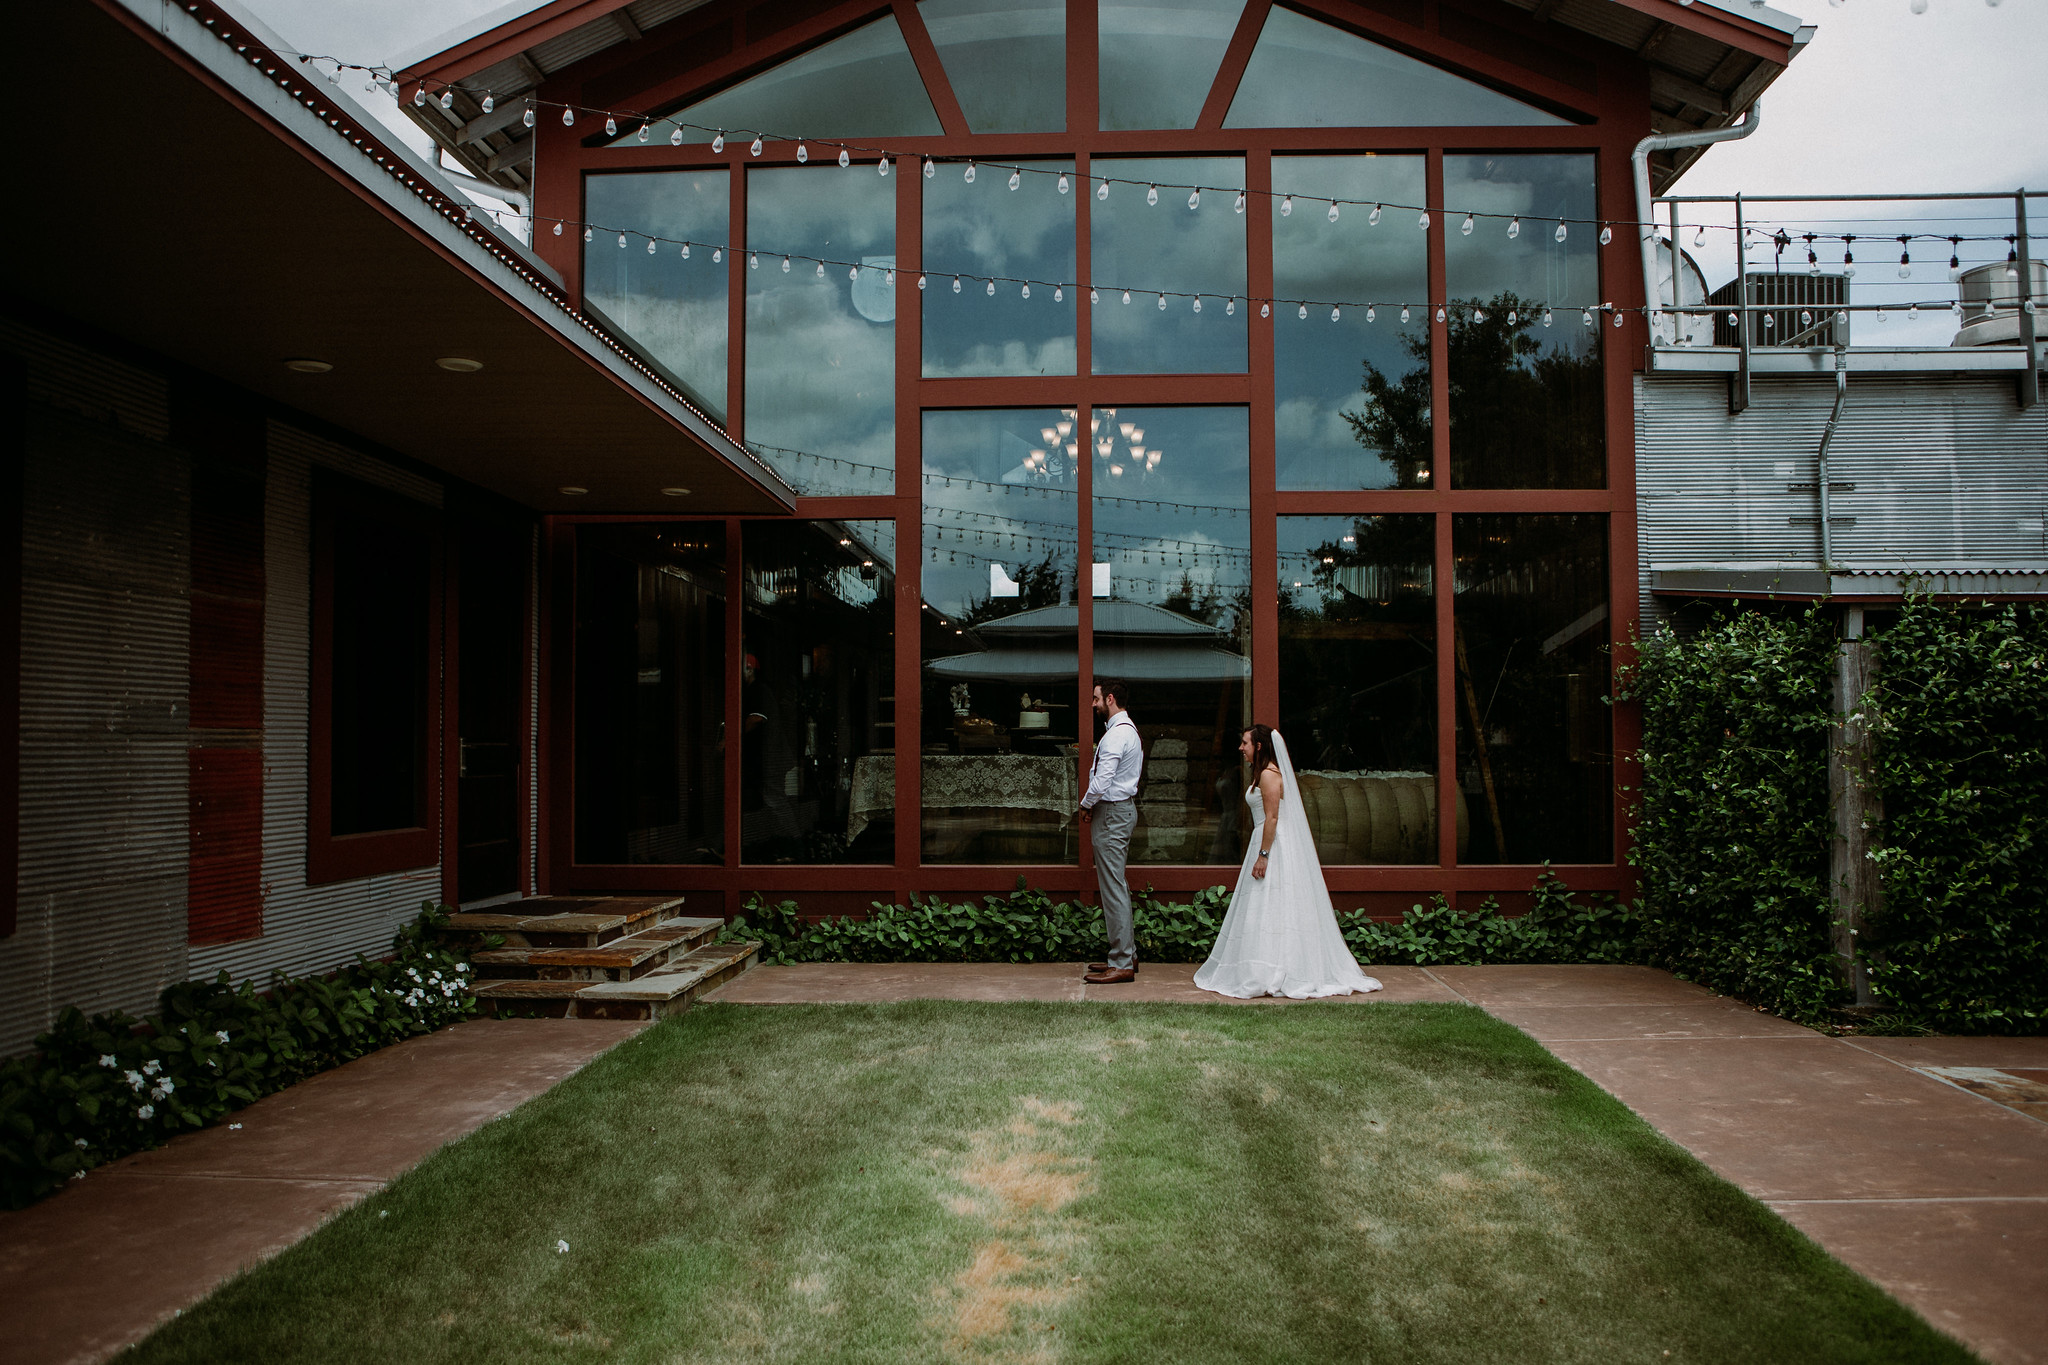 Bride and groom first look. Wedding at Cotton Gin No 116 Katy, TX